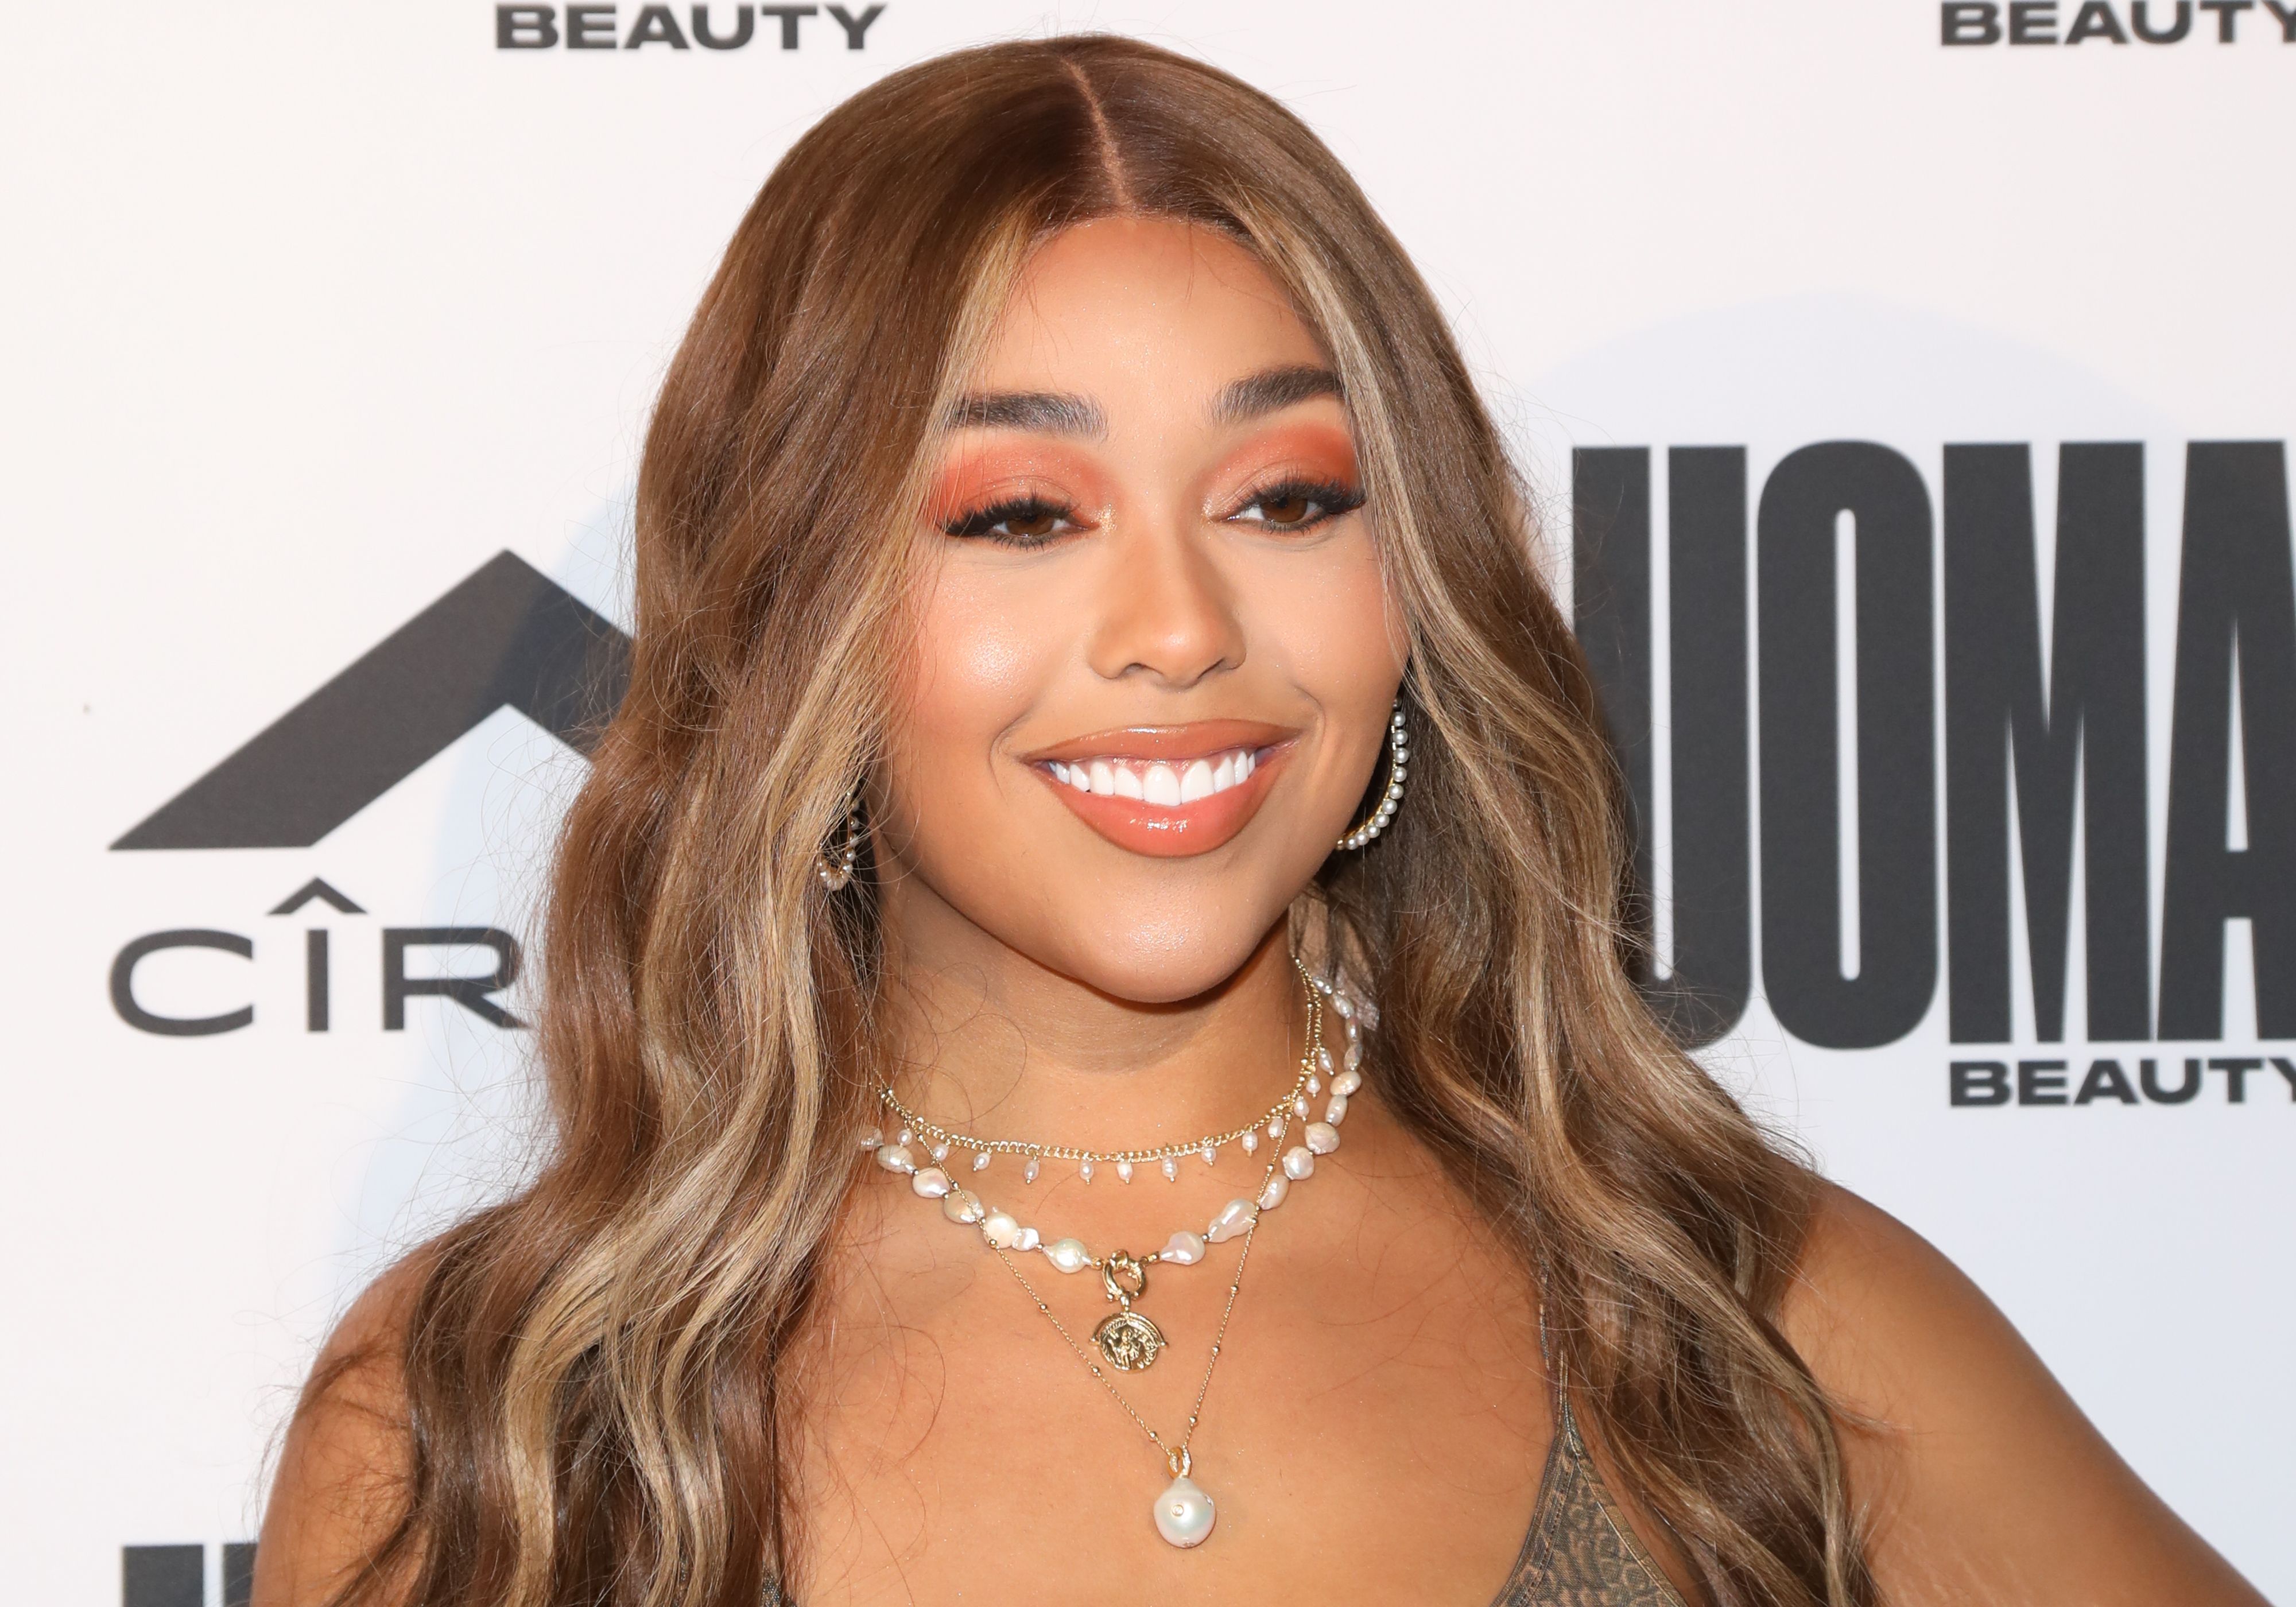 Jordyn Woods at the UOMA Summer House LA in August 2019 in Beverly Hills | Source: Getty Images